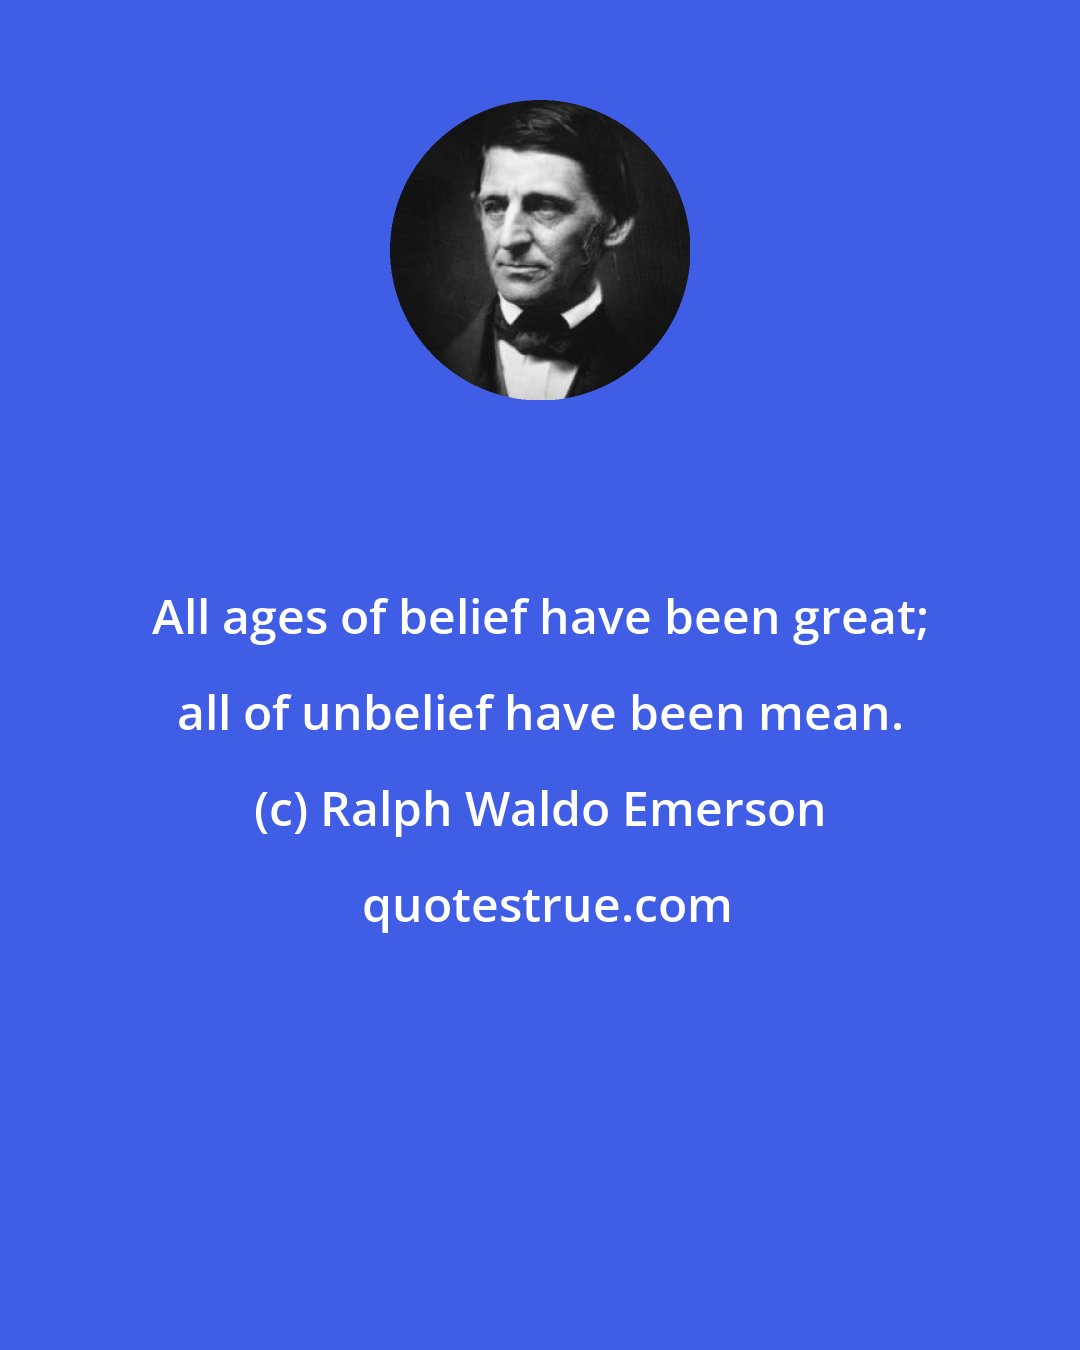 Ralph Waldo Emerson: All ages of belief have been great; all of unbelief have been mean.